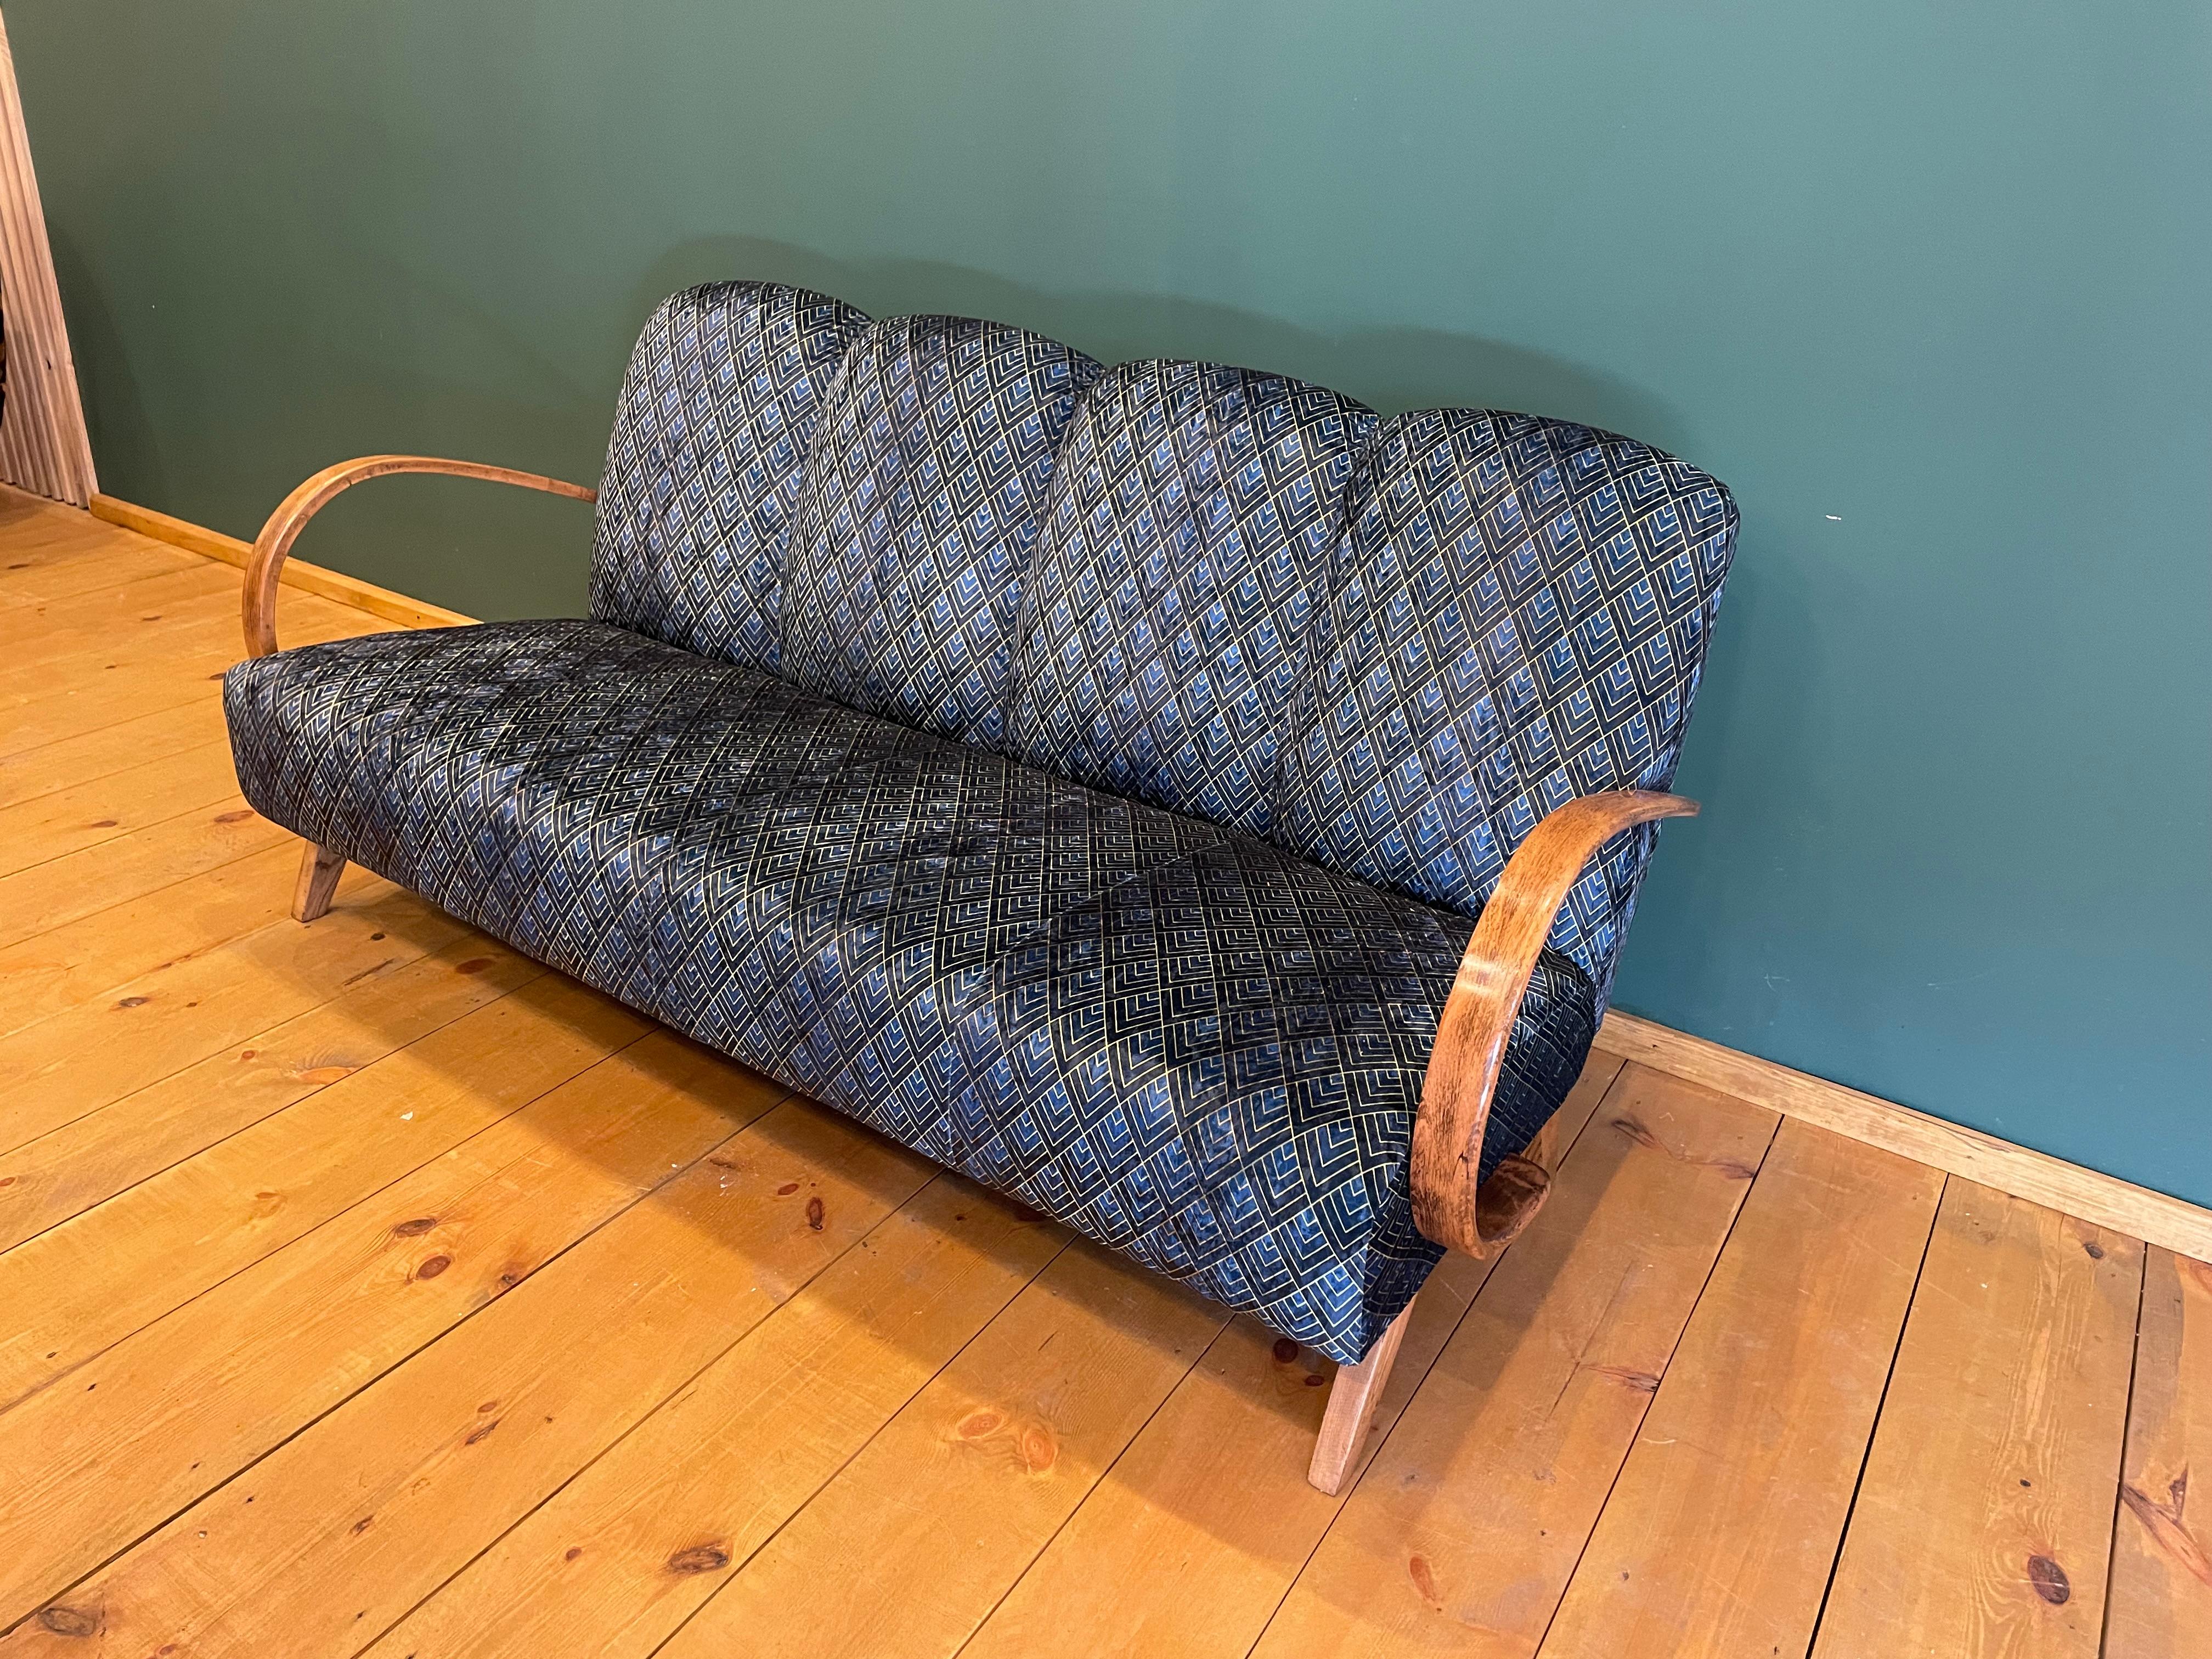 Art Deco couch J.Halabal from 1940
We present designer sofa by J.Halabala, It was made in the Czech Republic in the Up Zavud factory
It has been given a complex manual renovation, the whole upholstery has been replaced with a new one. Wooden parts